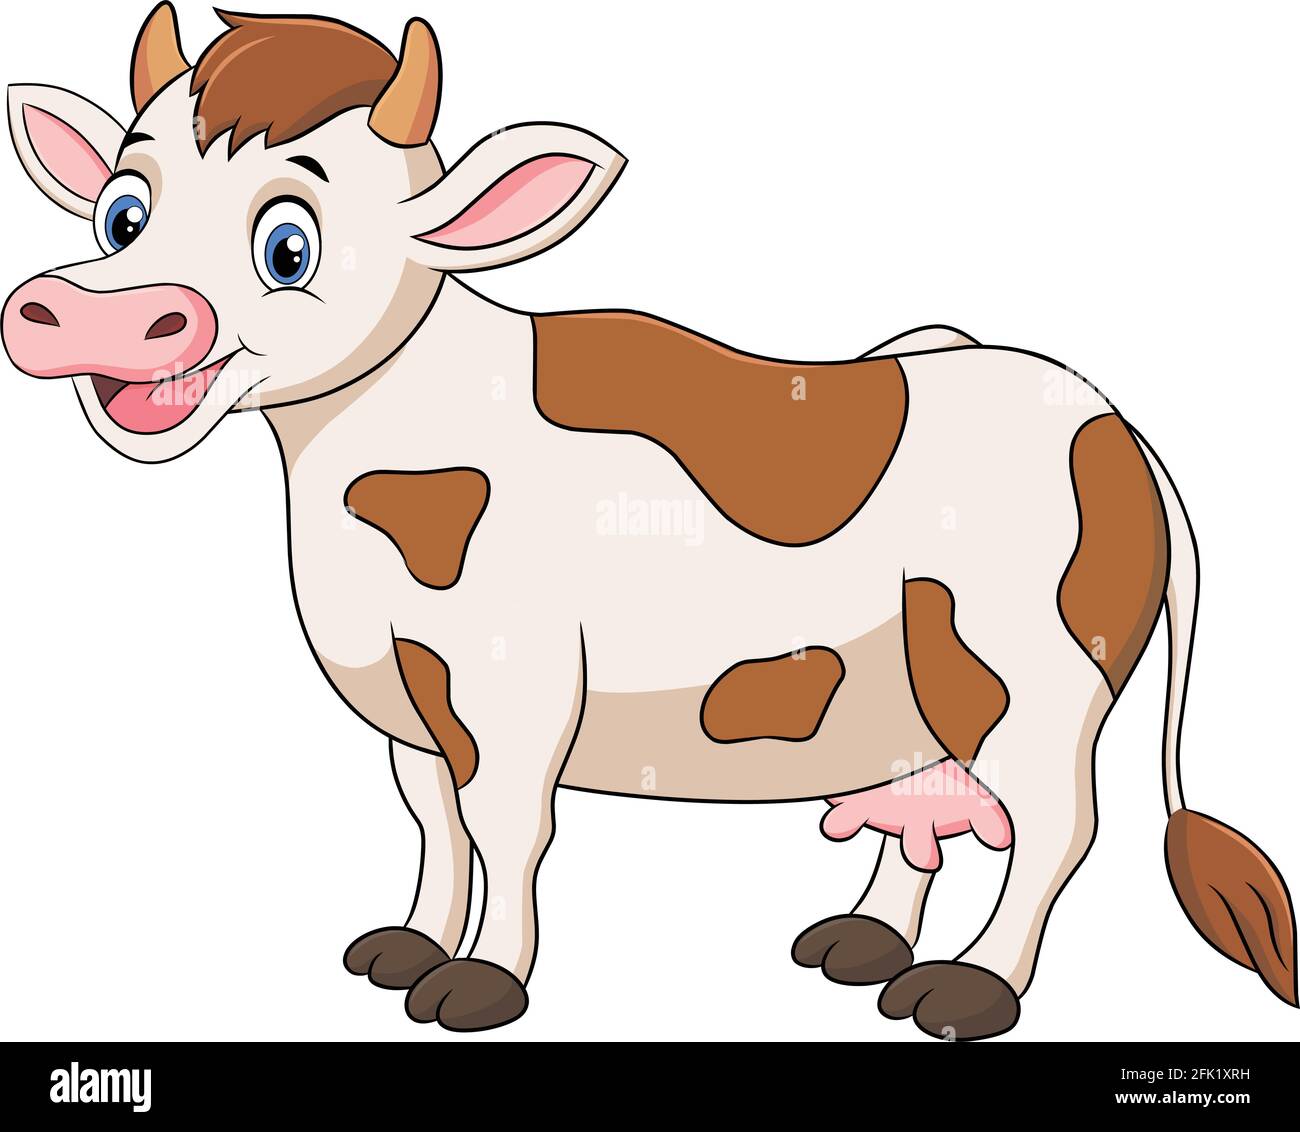 picture of a cartoon cow